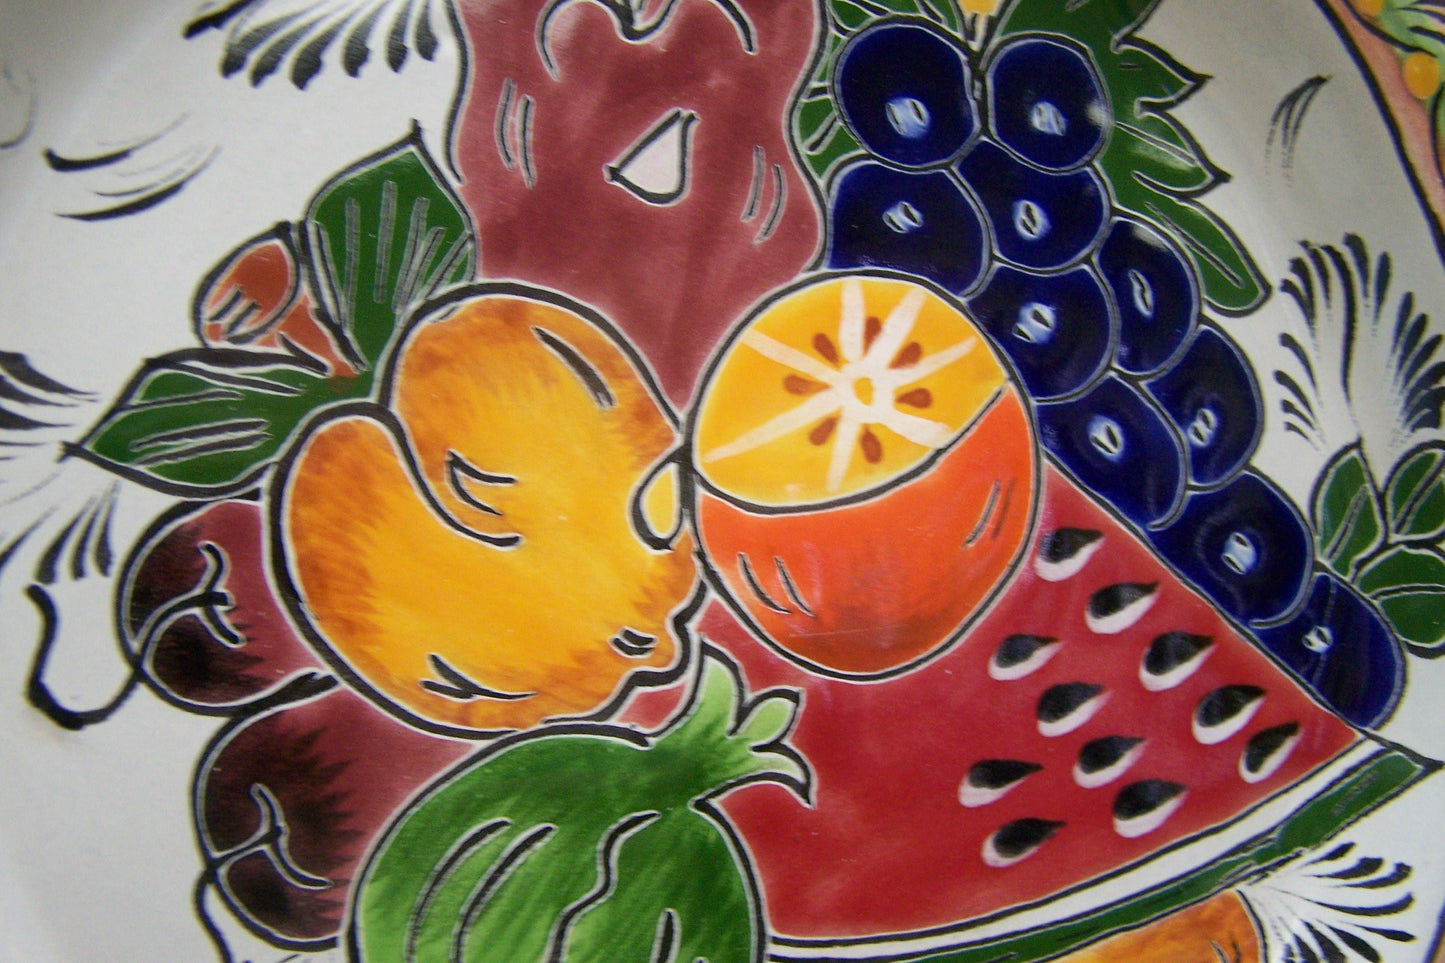 Beautiful Vintage Talavera Fruit Plate with Angled Edges - Mexico